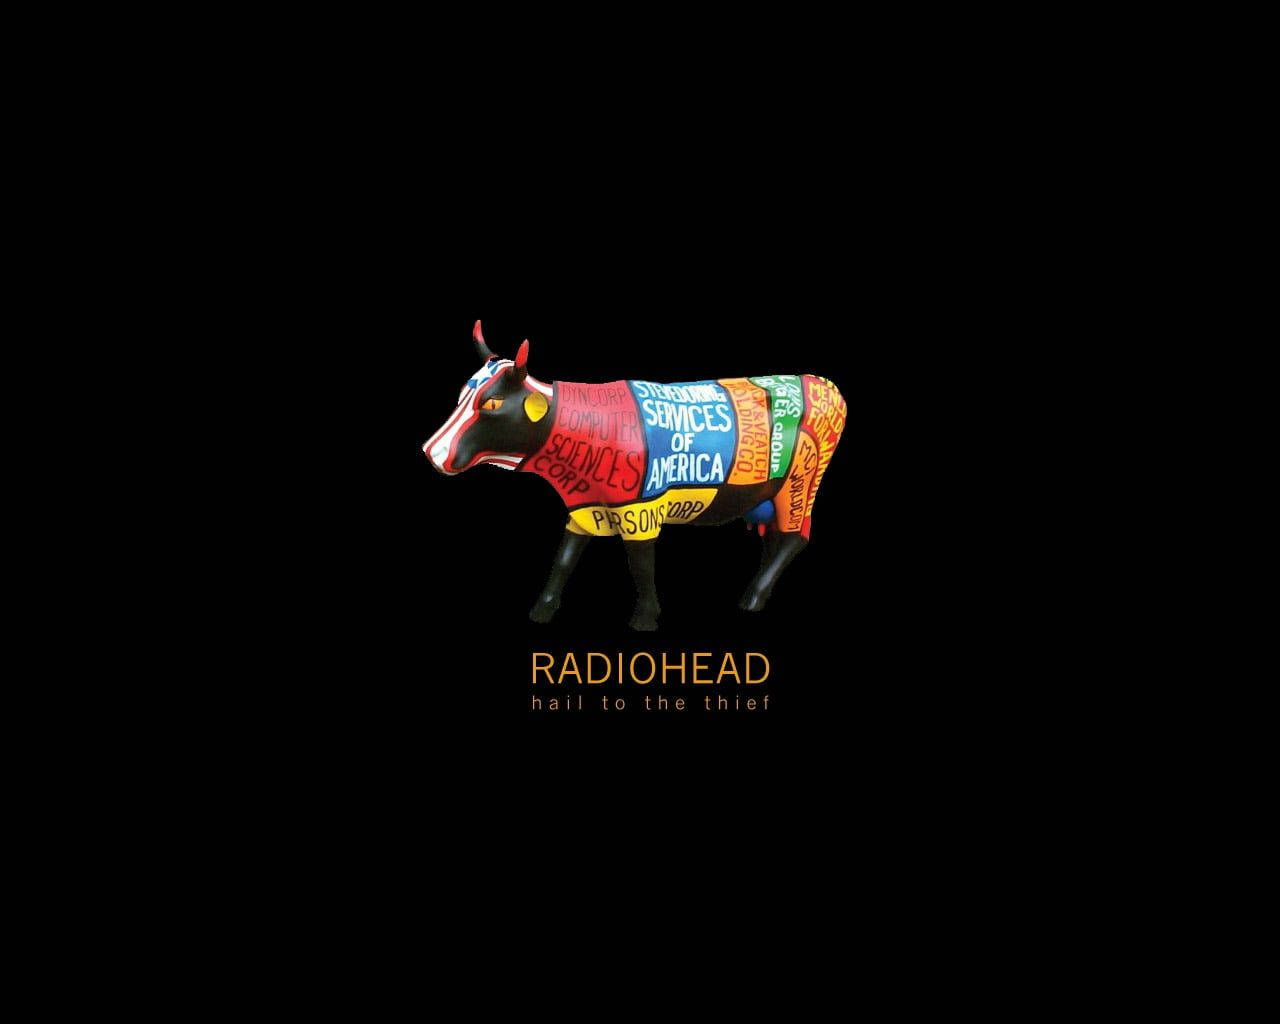 Intriguing Artwork from Radiohead's 'Hail To The Thief' Album Wallpaper